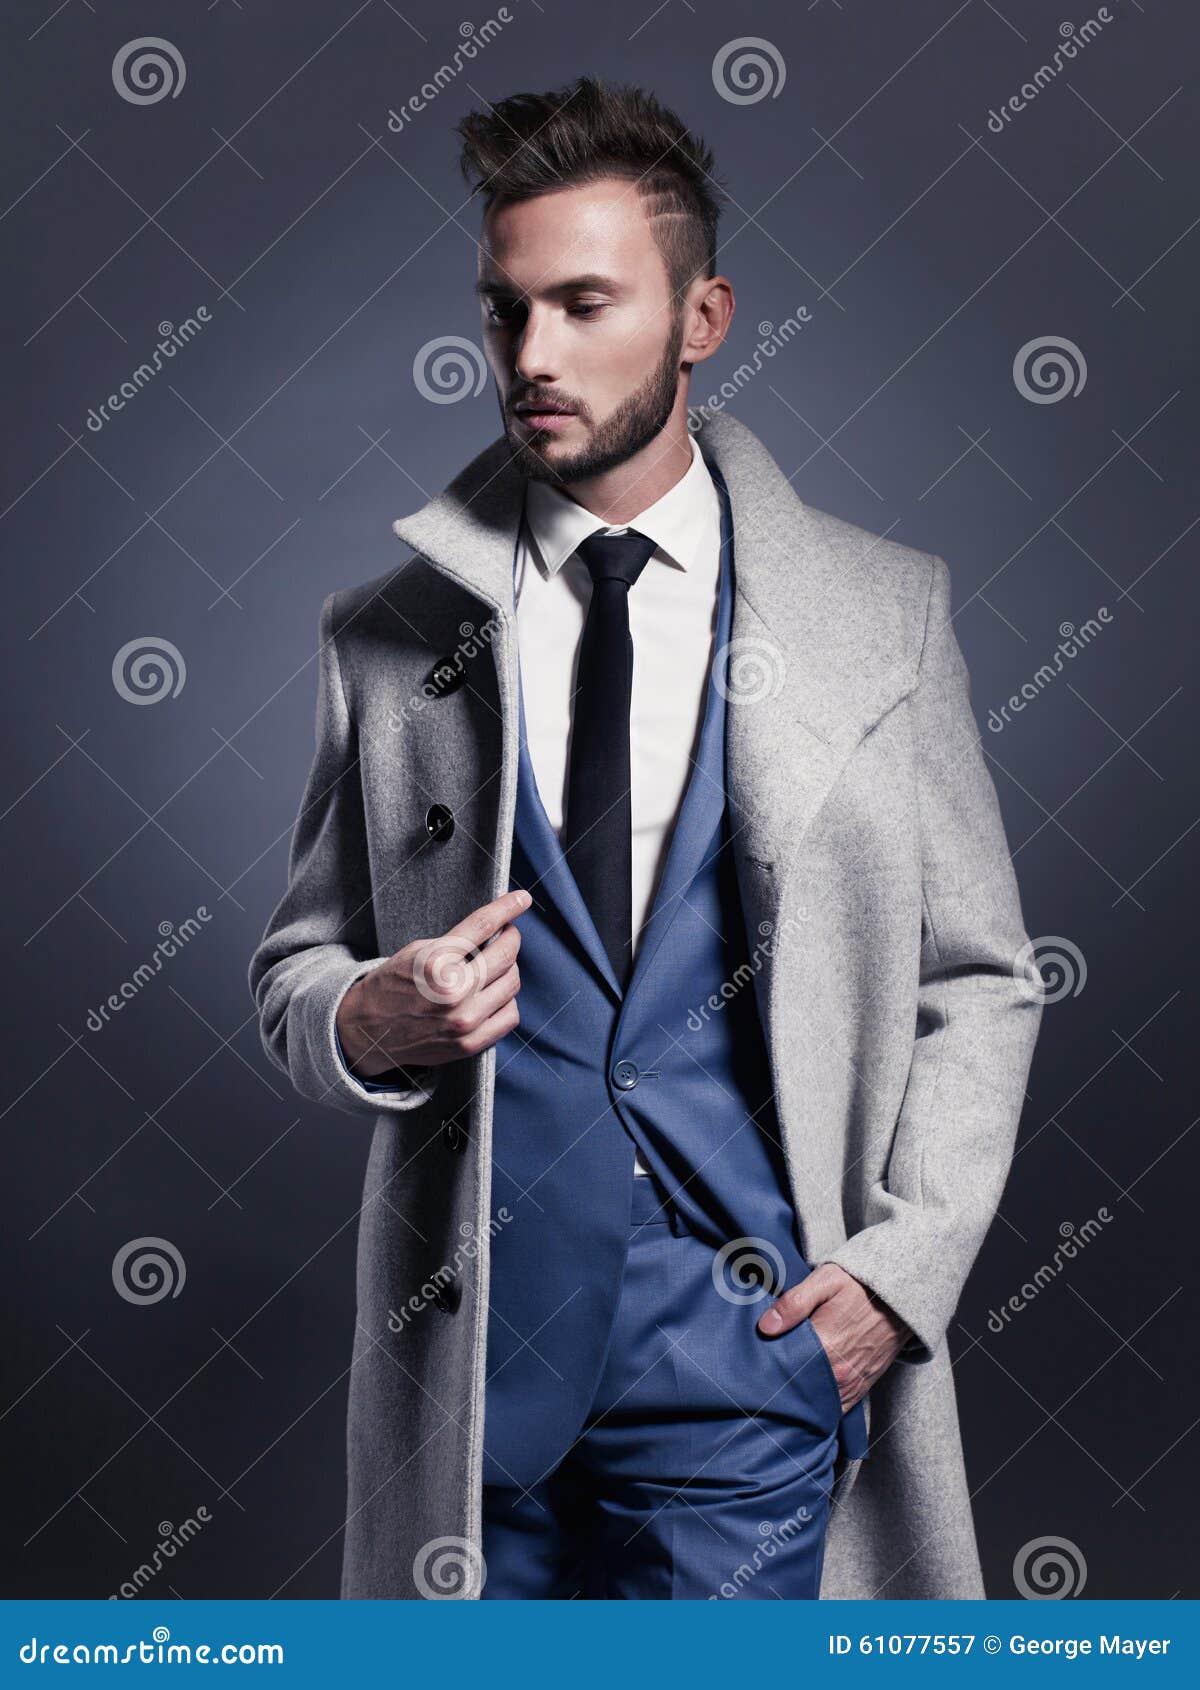 Handsome Stylish Man in Autumn Coat Stock Image - Image of casual ...